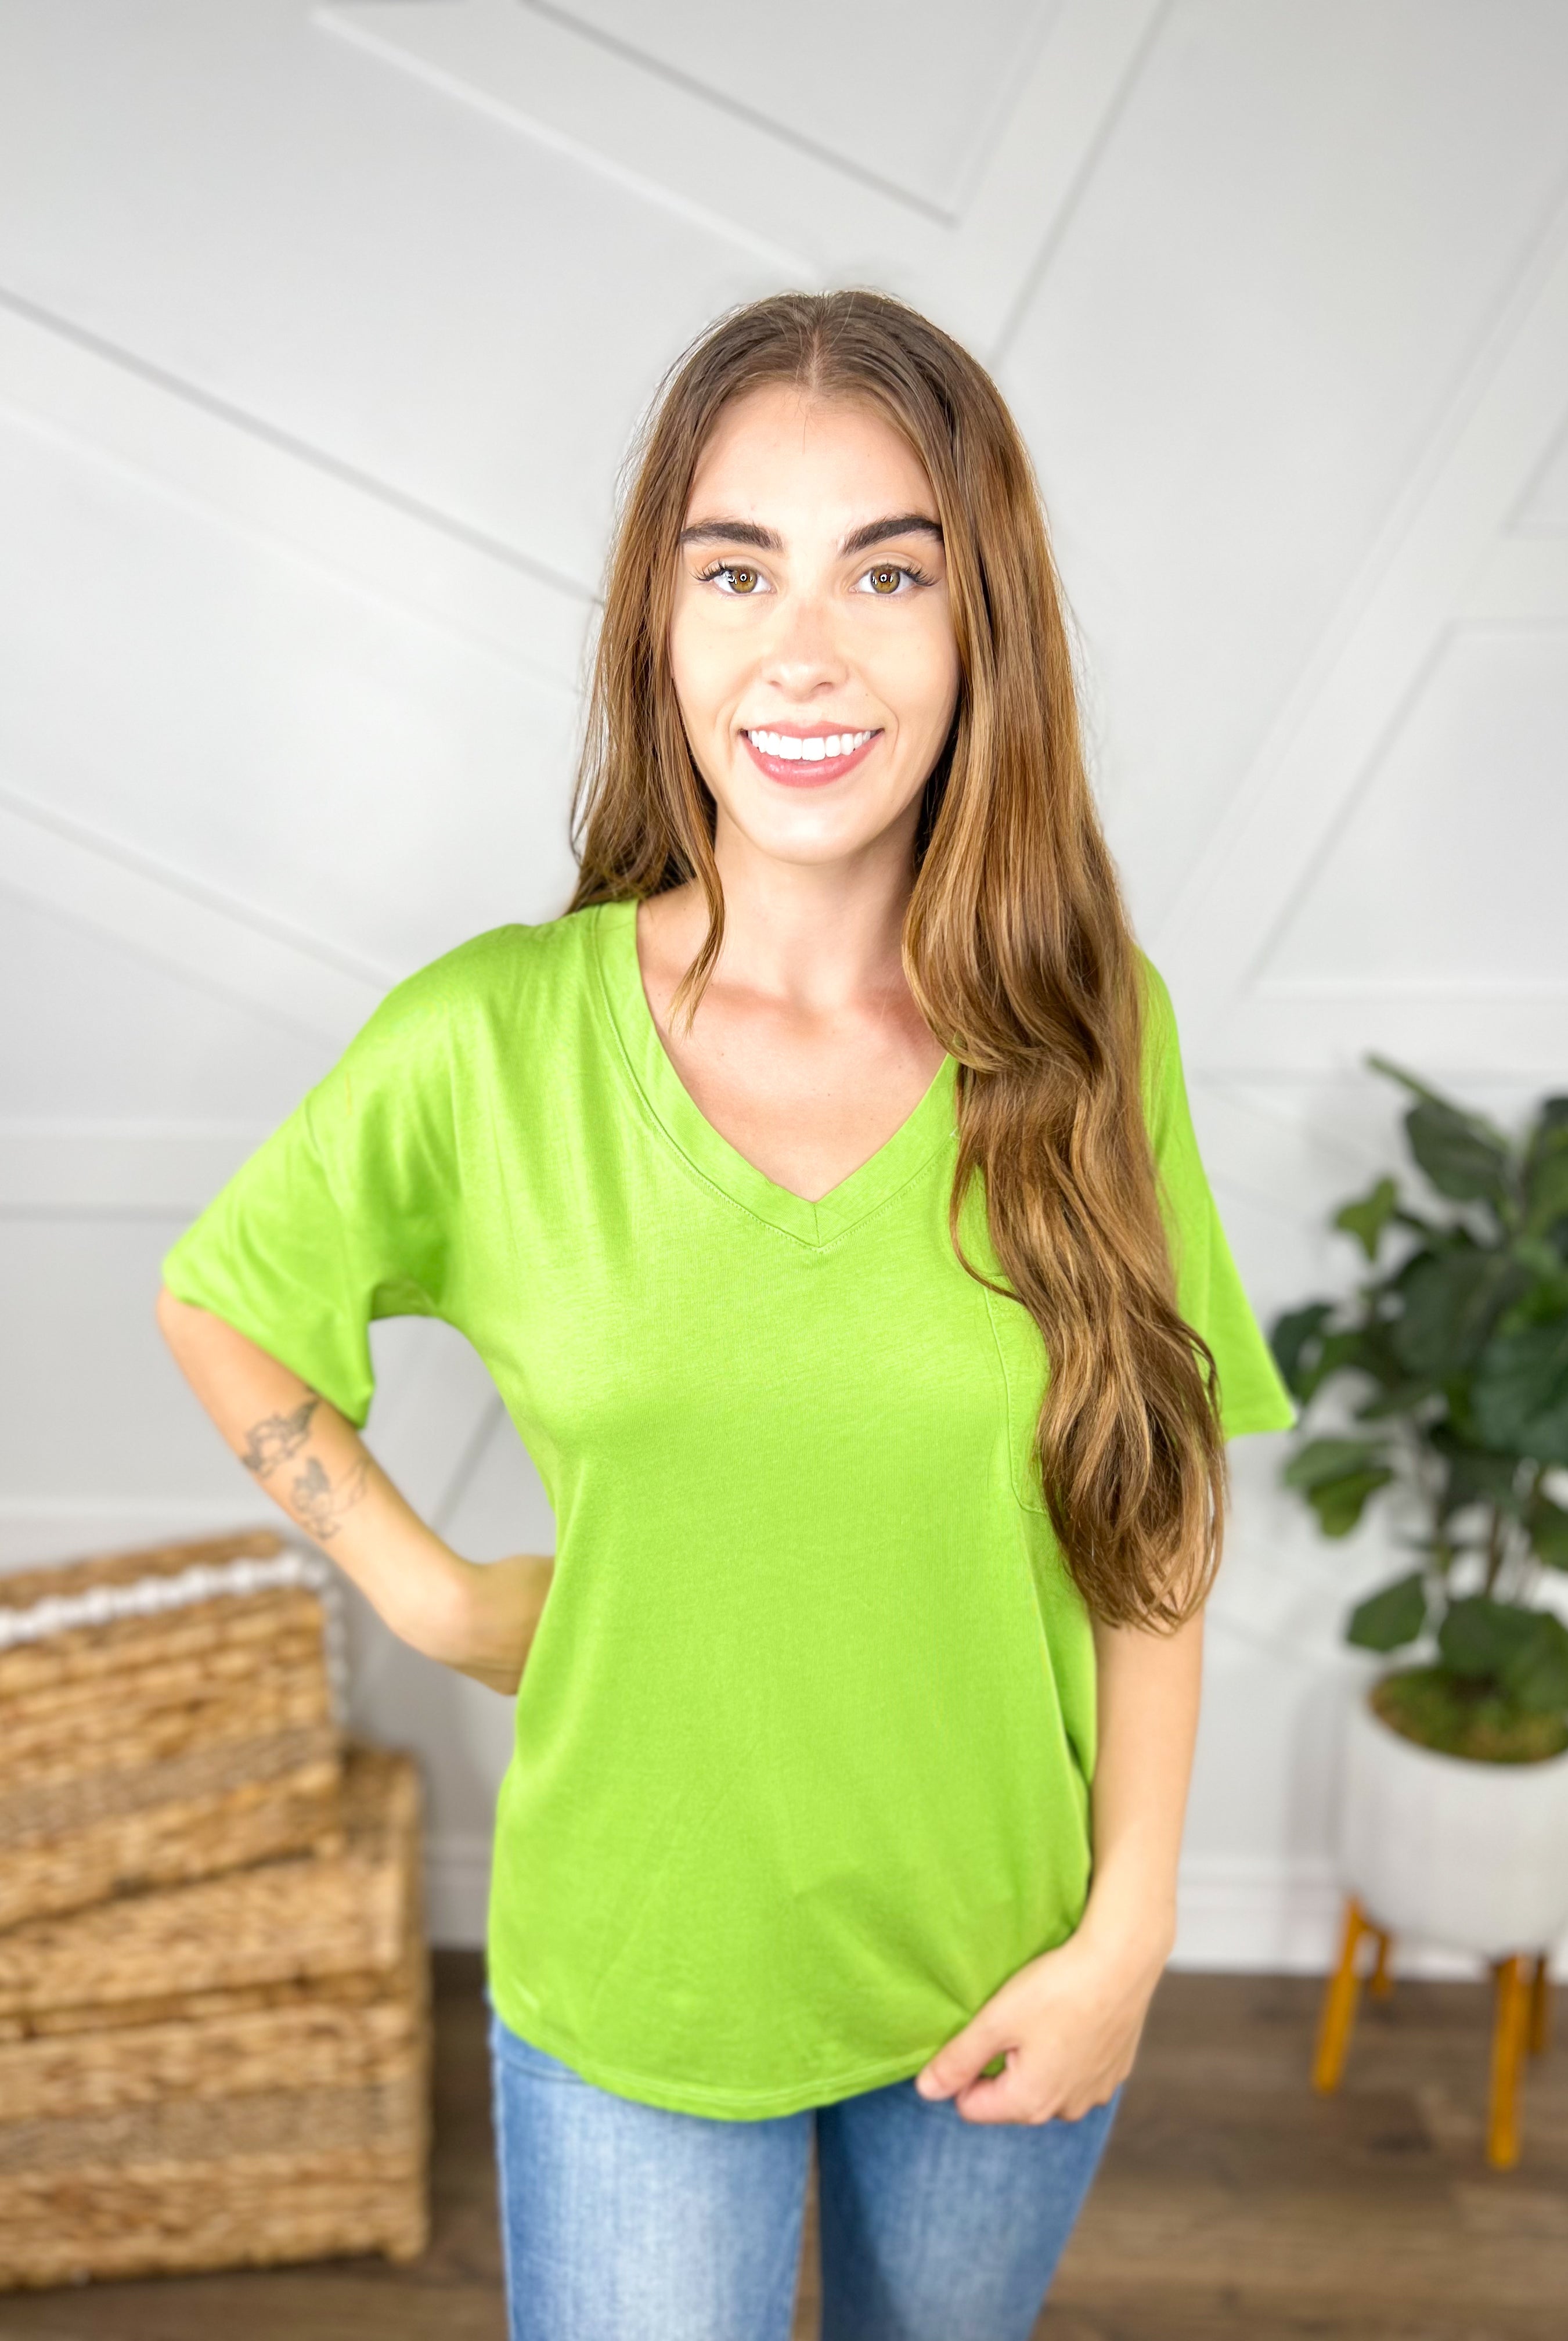 Crafted Magic Top-110 Short Sleeve Top-Culture Code-Heathered Boho Boutique, Women's Fashion and Accessories in Palmetto, FL